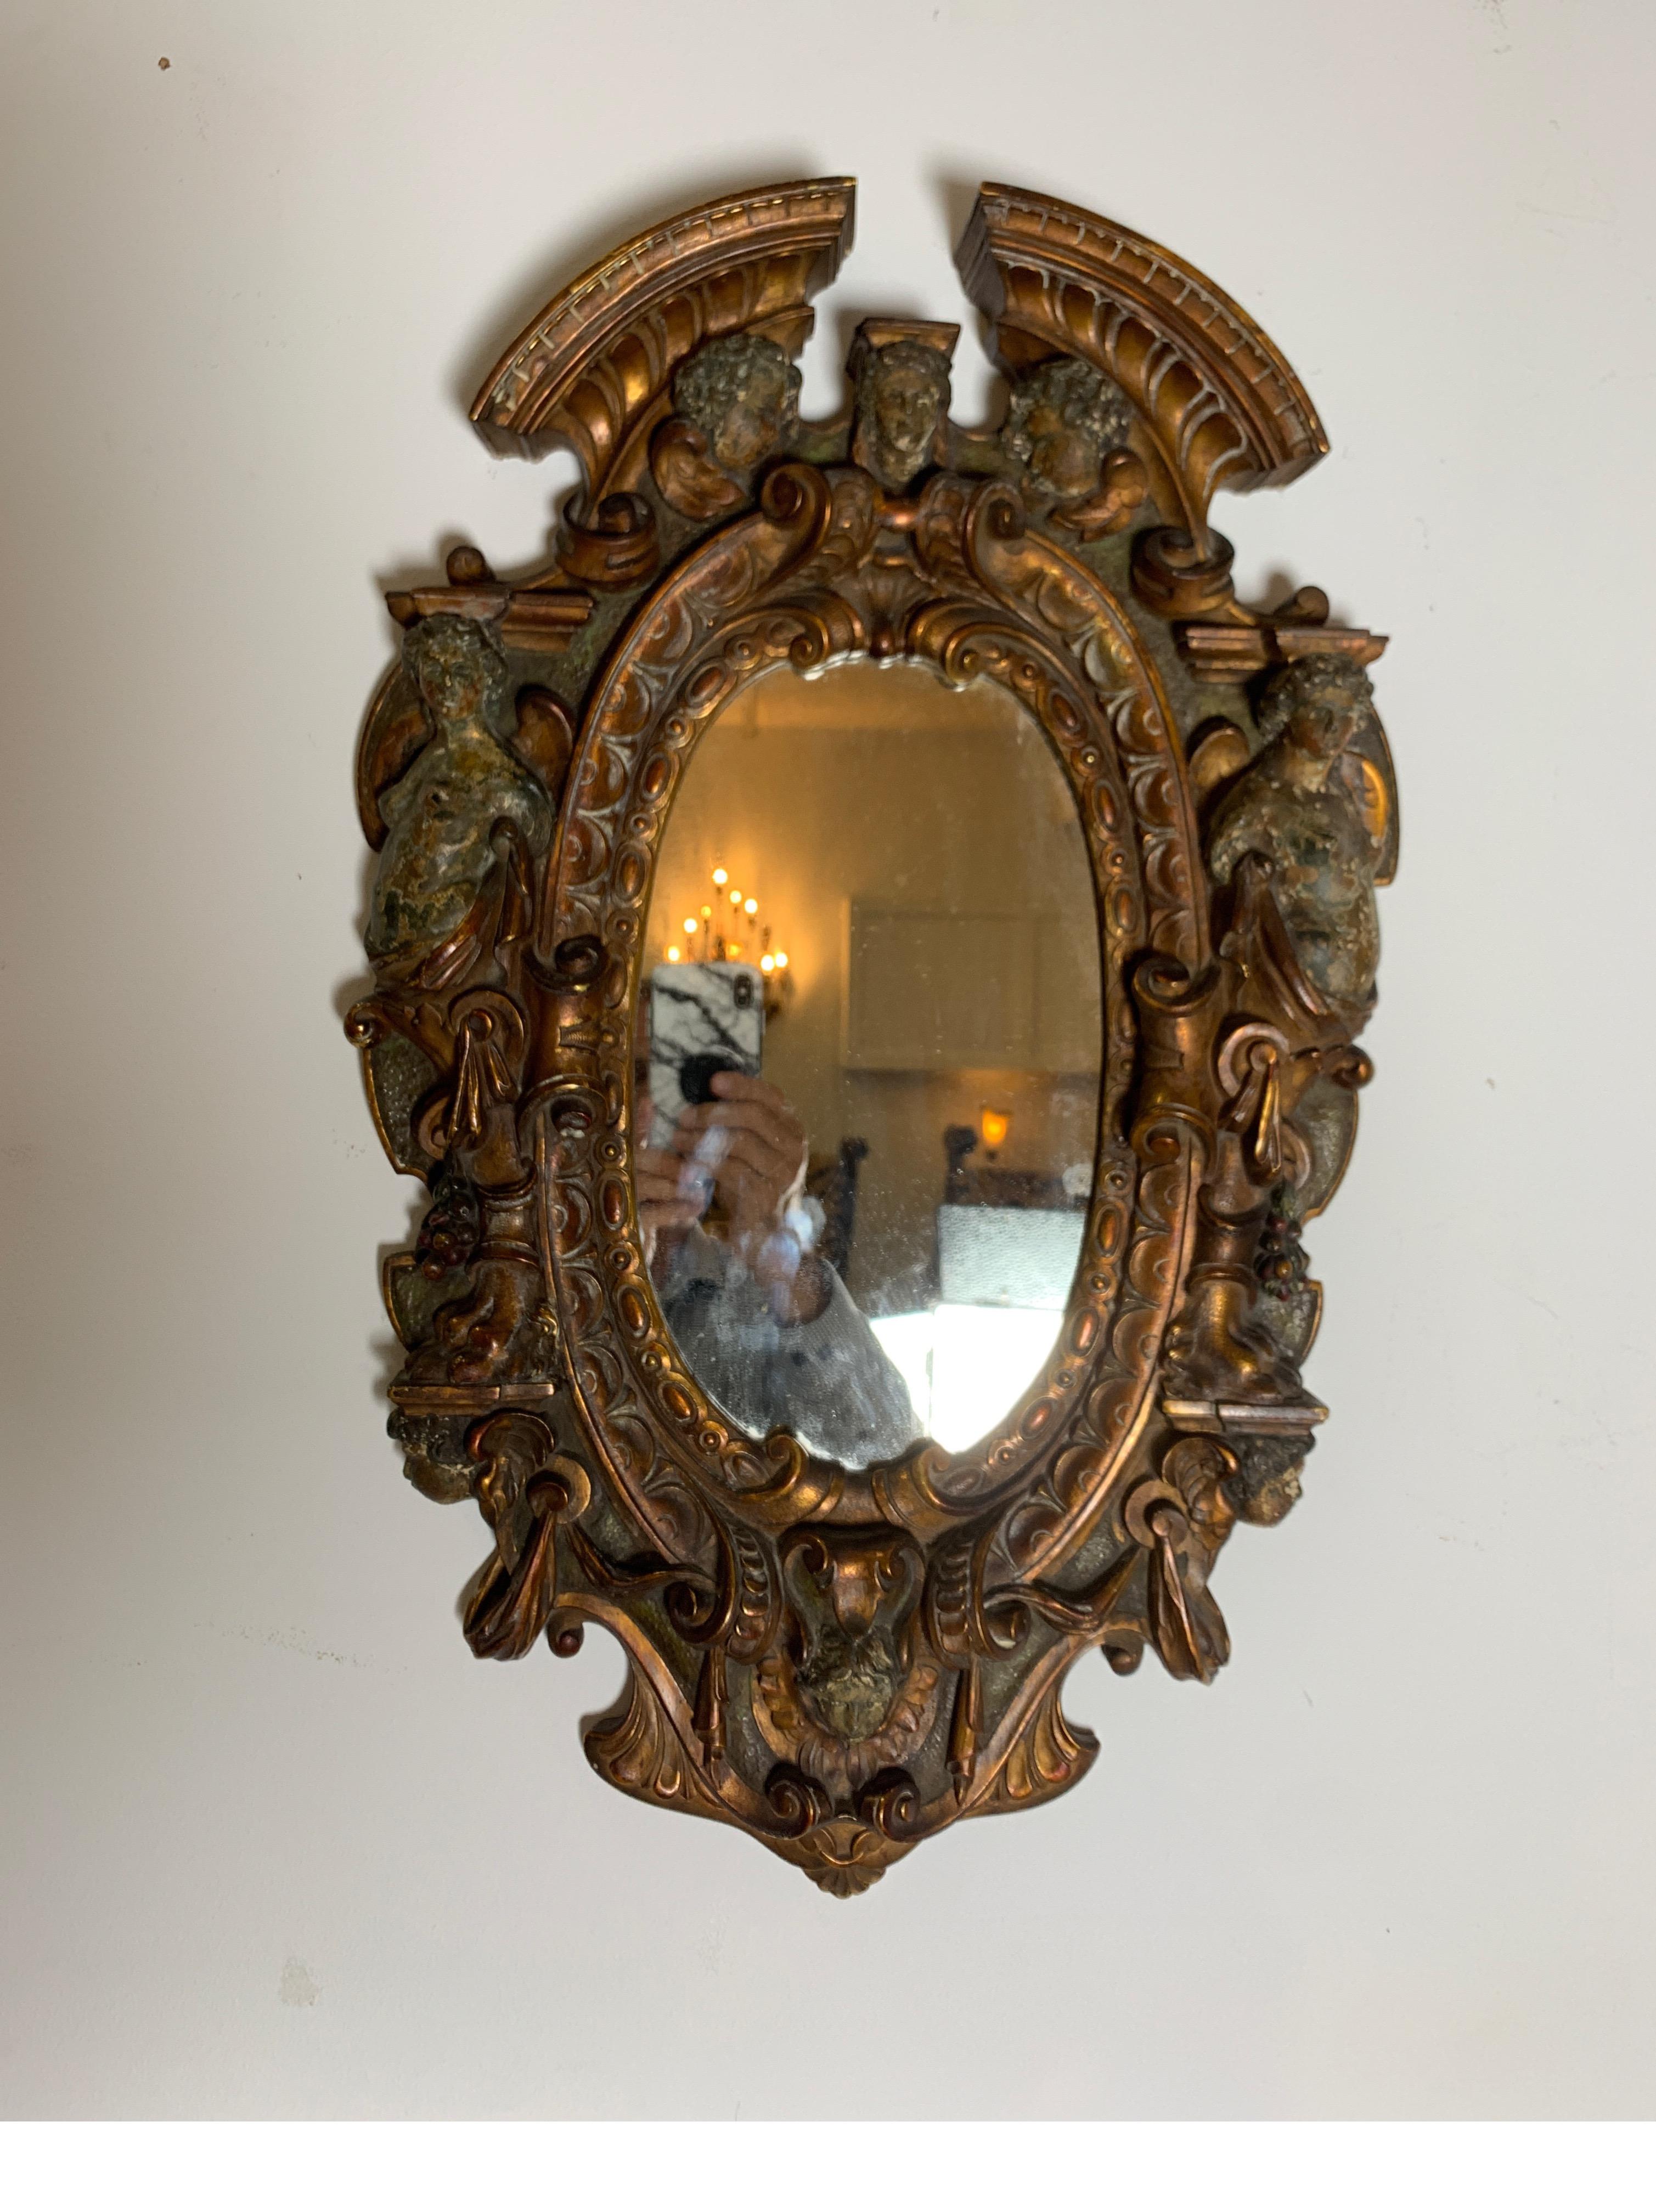 17th-18th century mixed metal Italian Renaissance mirror, made in Tuscan Italy
exceptional figural Renaissance antique mirror which is very hard to find from that
time period.